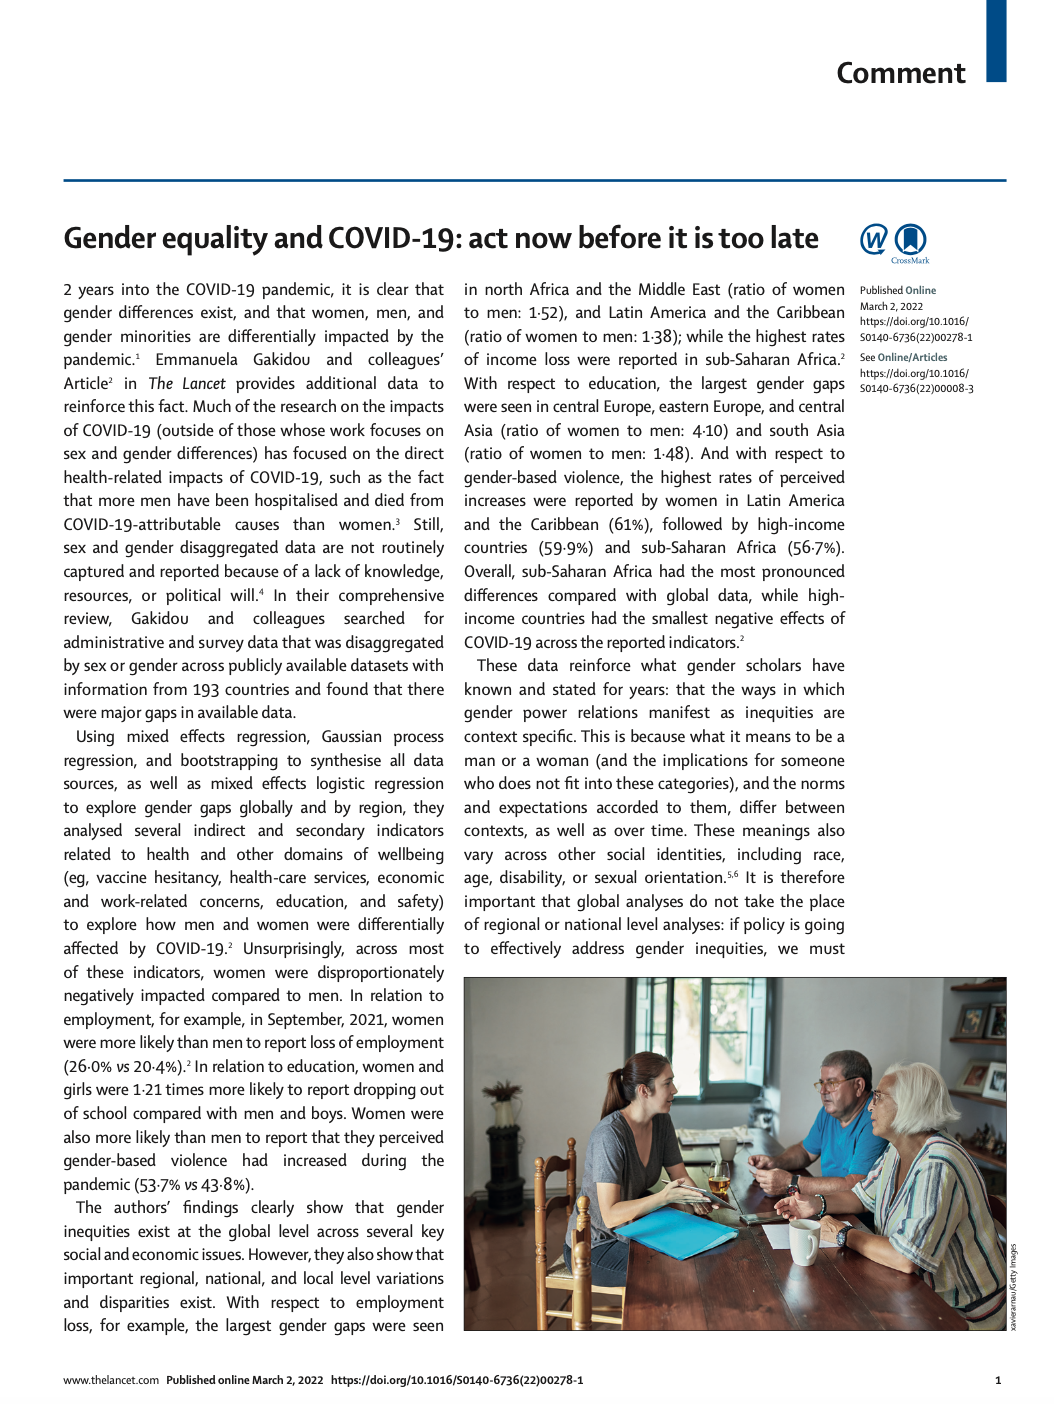 Gender equality and COVID-19: act now before it is too late